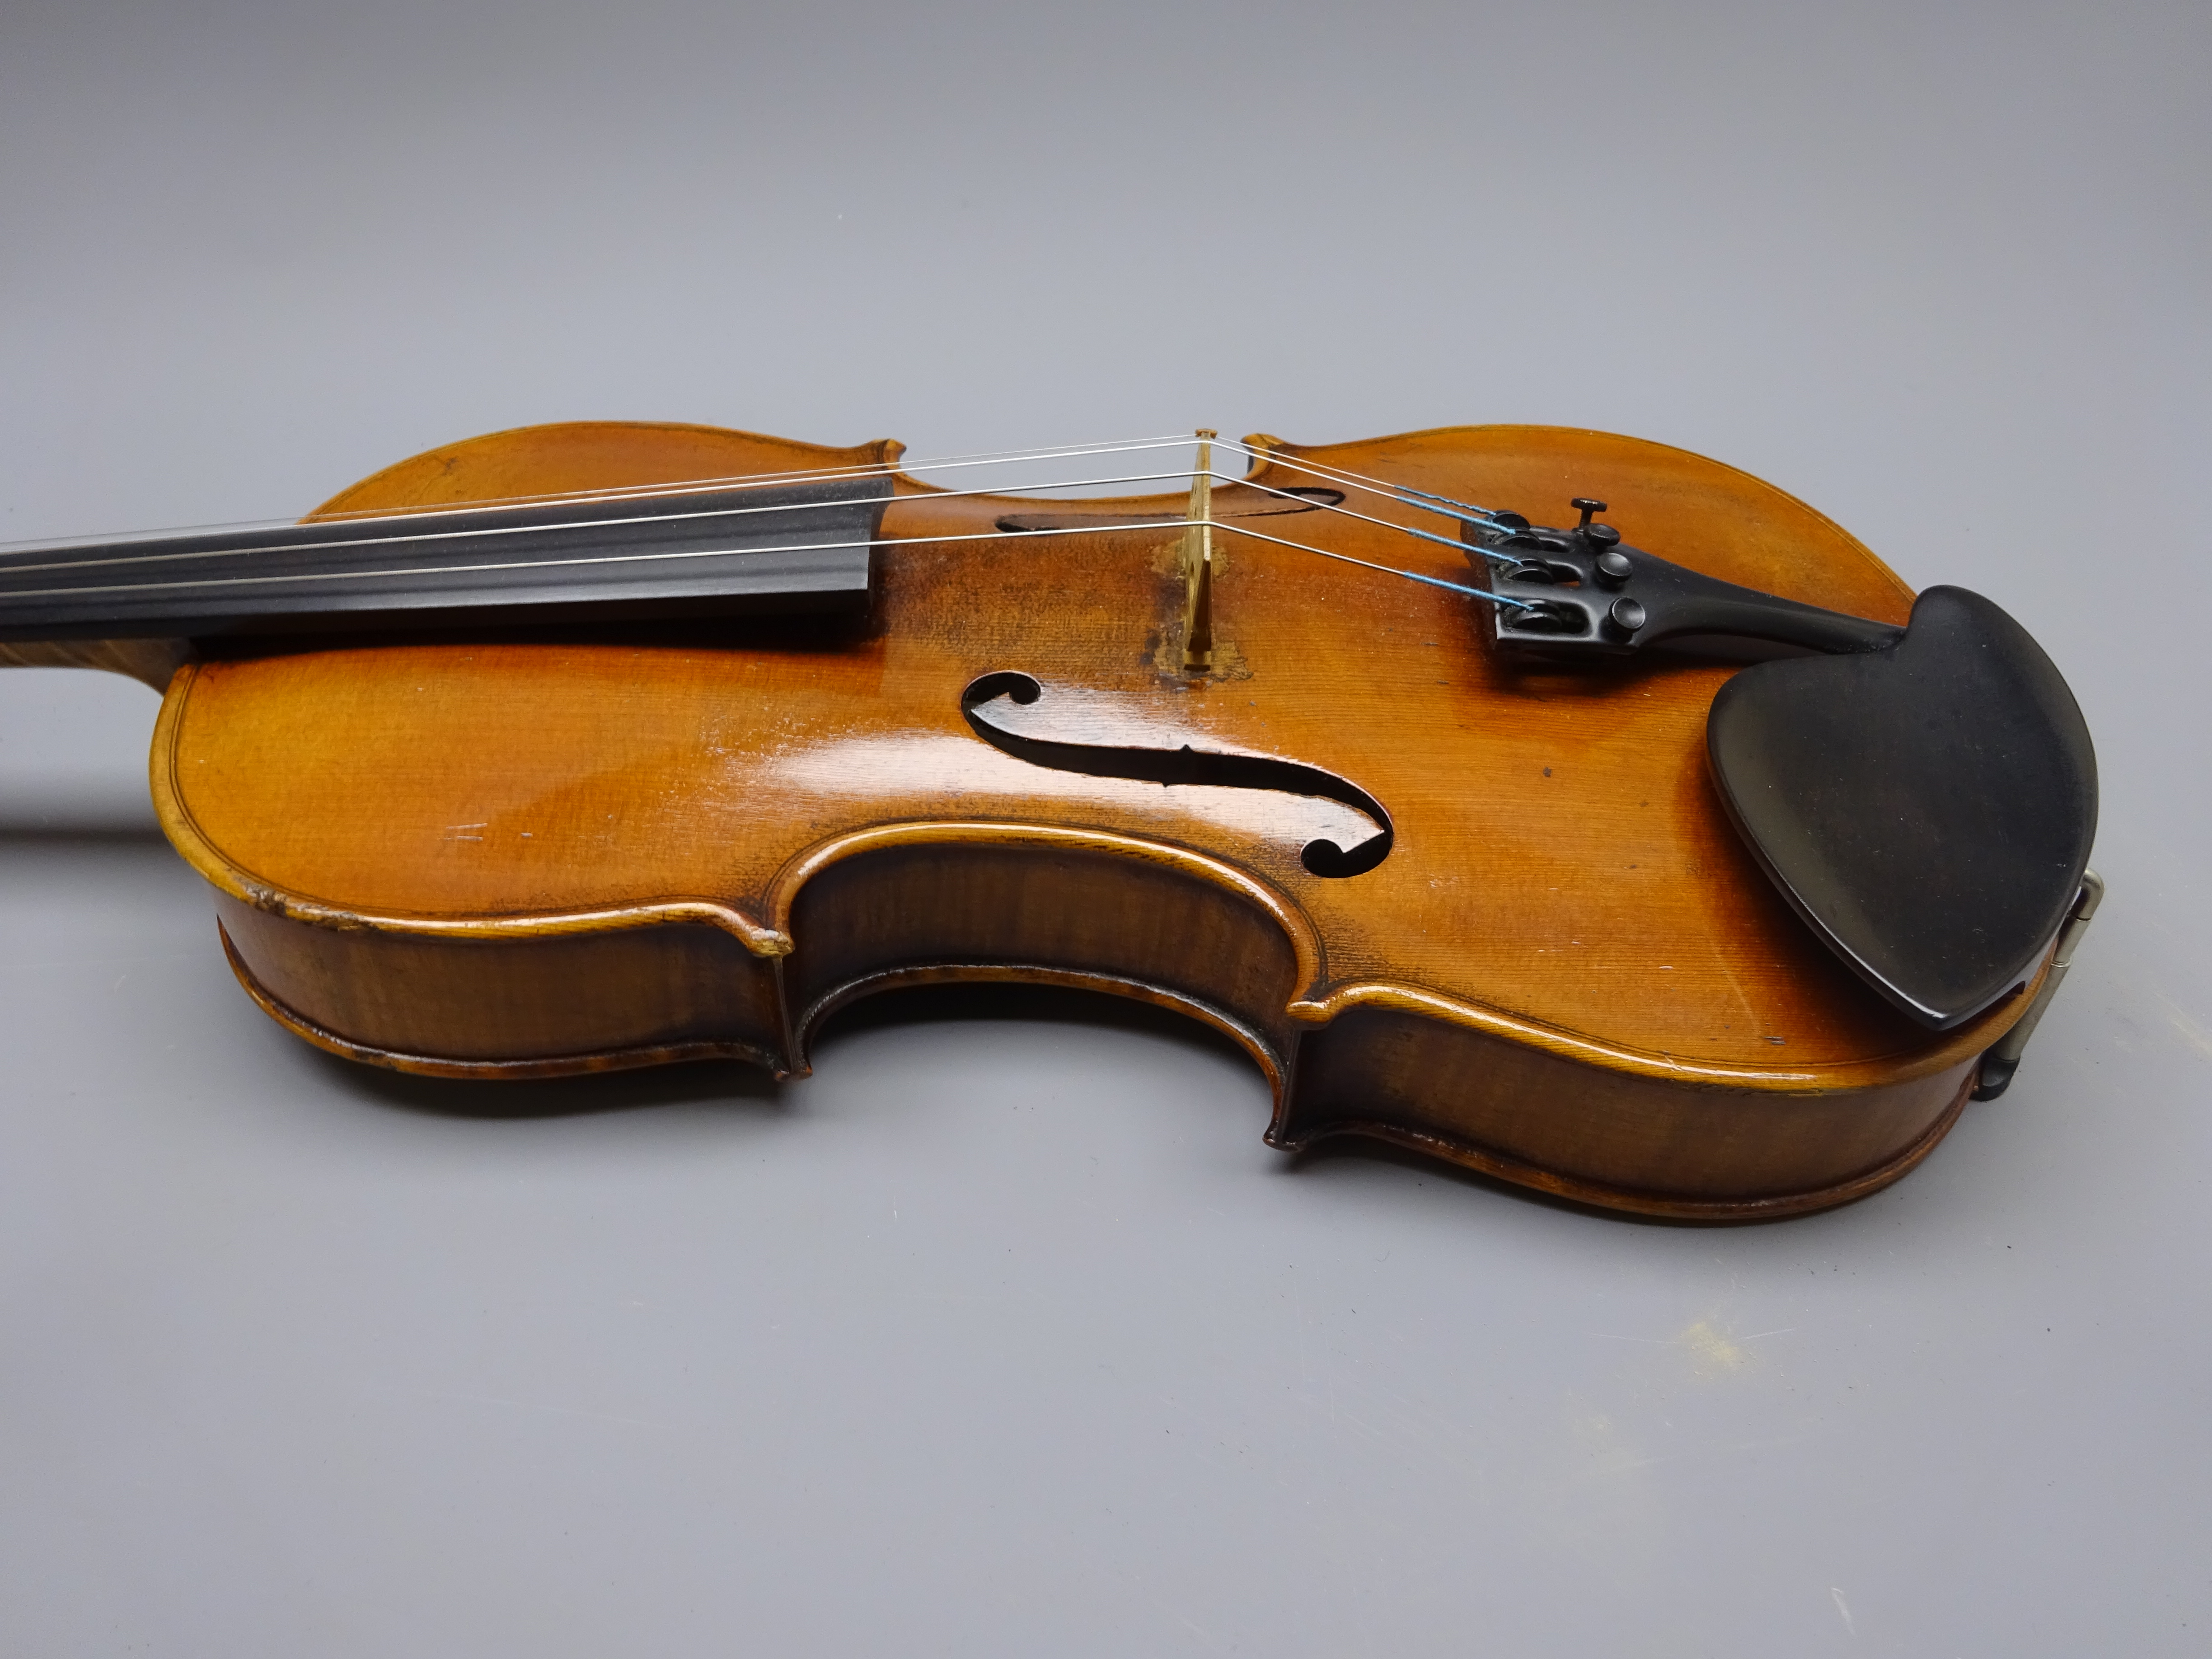 Late 19th century German violin c1890 with 36cm two-piece maple back and ribs and spruce top, - Image 7 of 15